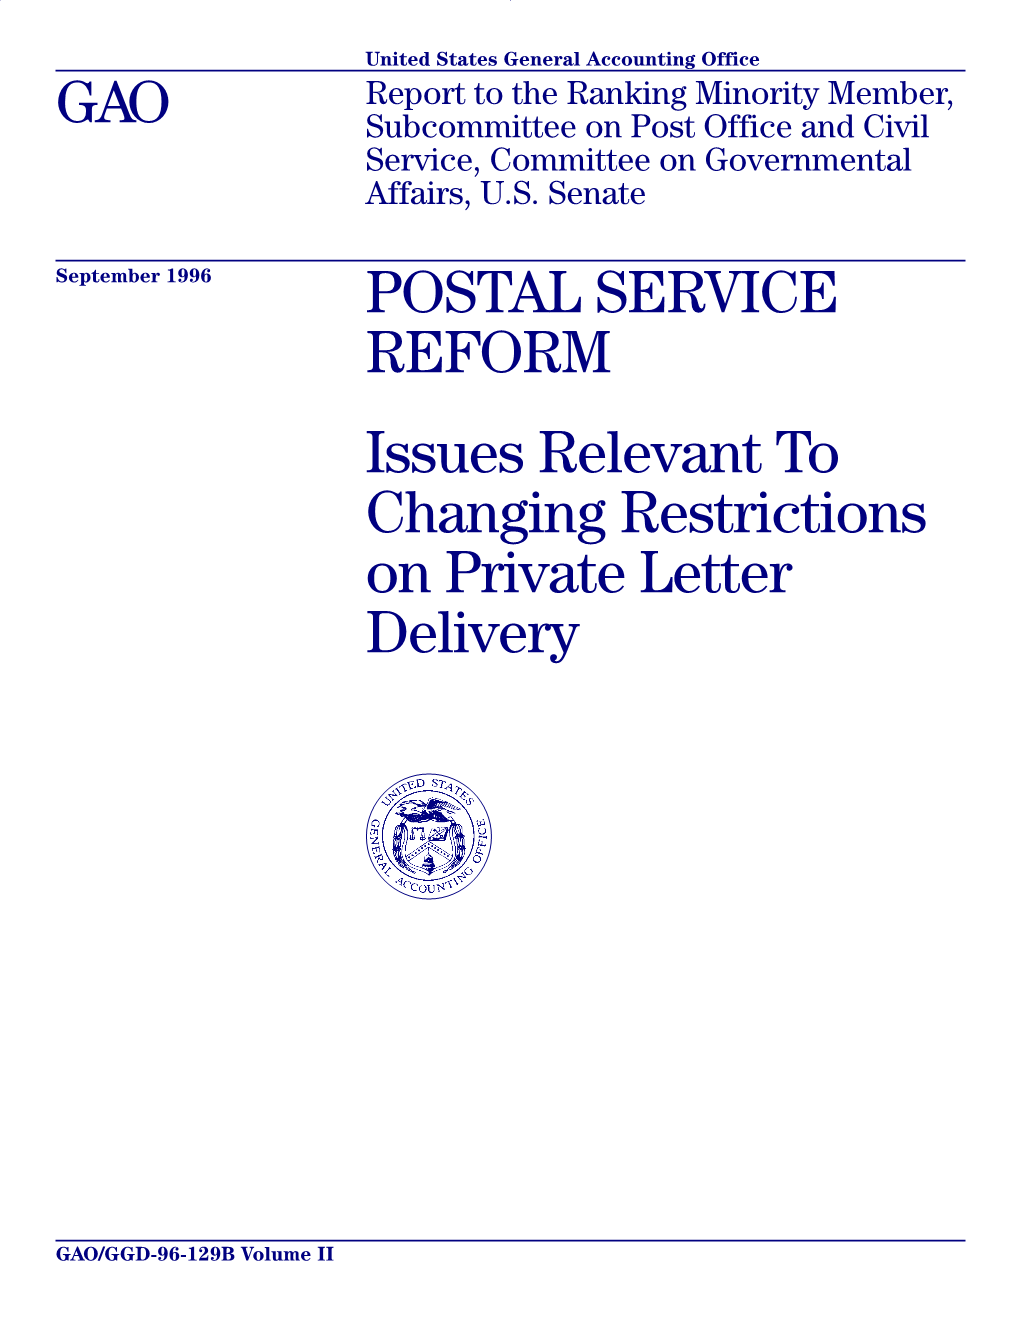 POSTAL SERVICE REFORM: Issues Relevant to Changing Restrictions